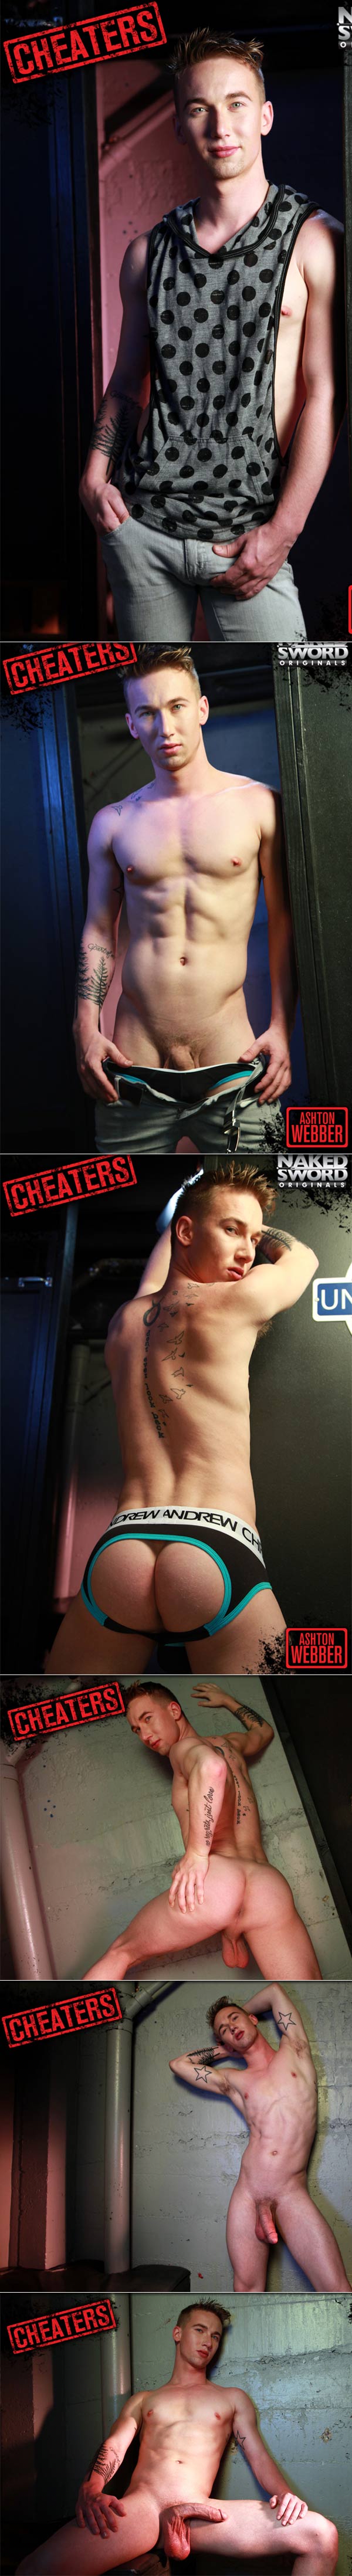 Cheaters Episode 3: Lies and Alibis (Andrew Fitch & Ashton Webber) at NakedSword